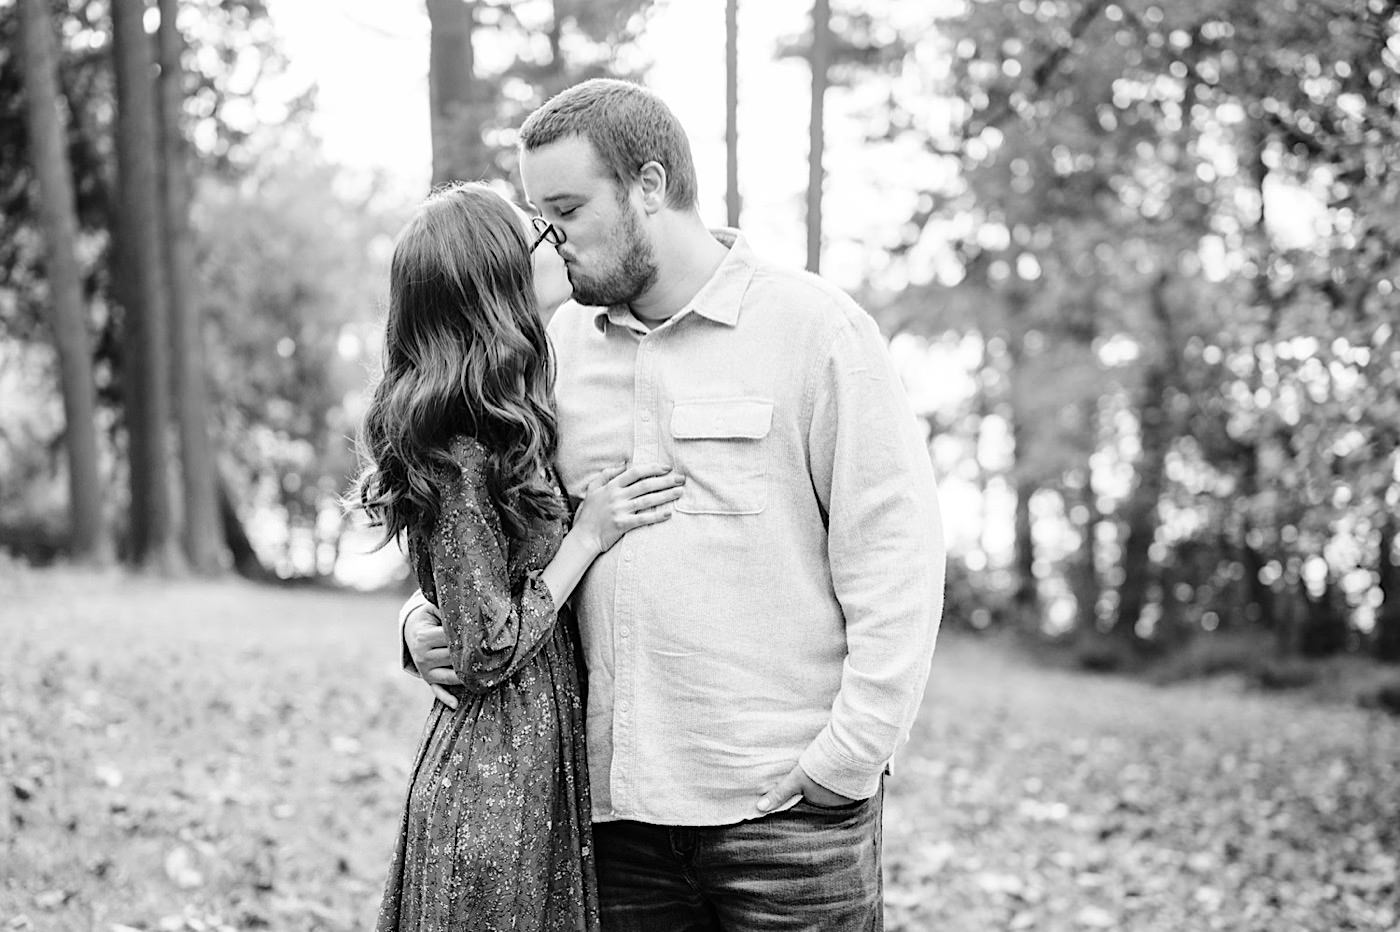 Southern Maryland Wedding Photographer, Loch Raven Reservoir Engagement Session, Kyra Gustwick, Baltimore MD Photographer